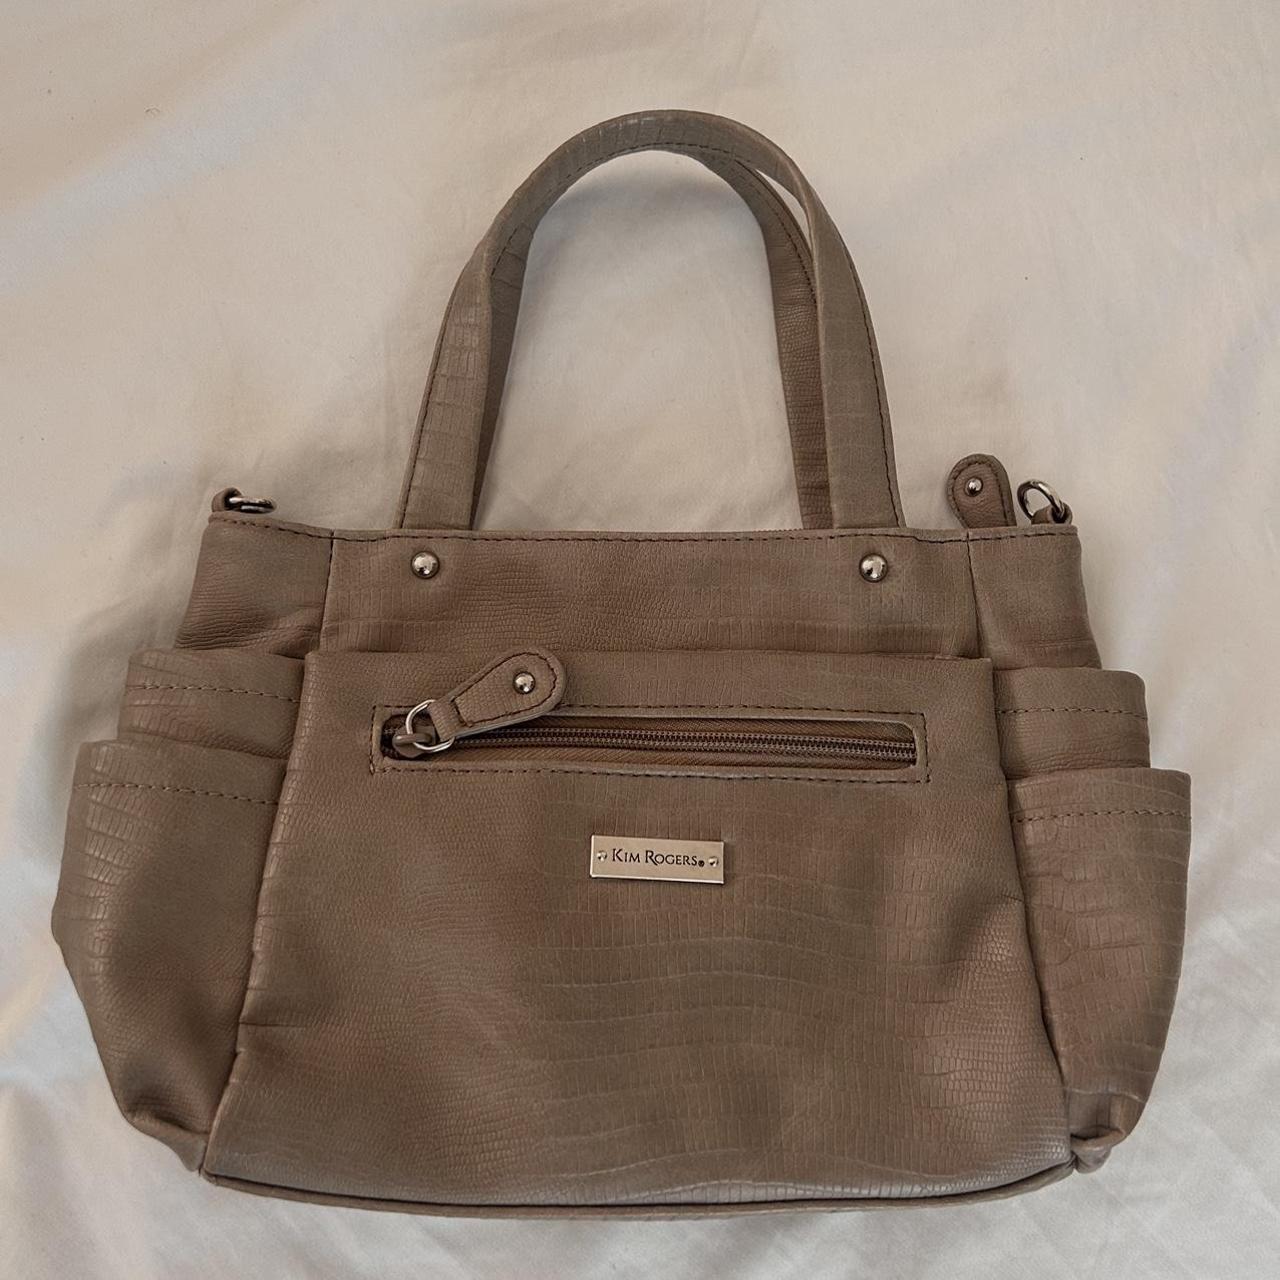 Kim Rogers Mini Tote Bag New condition as shown in... - Depop